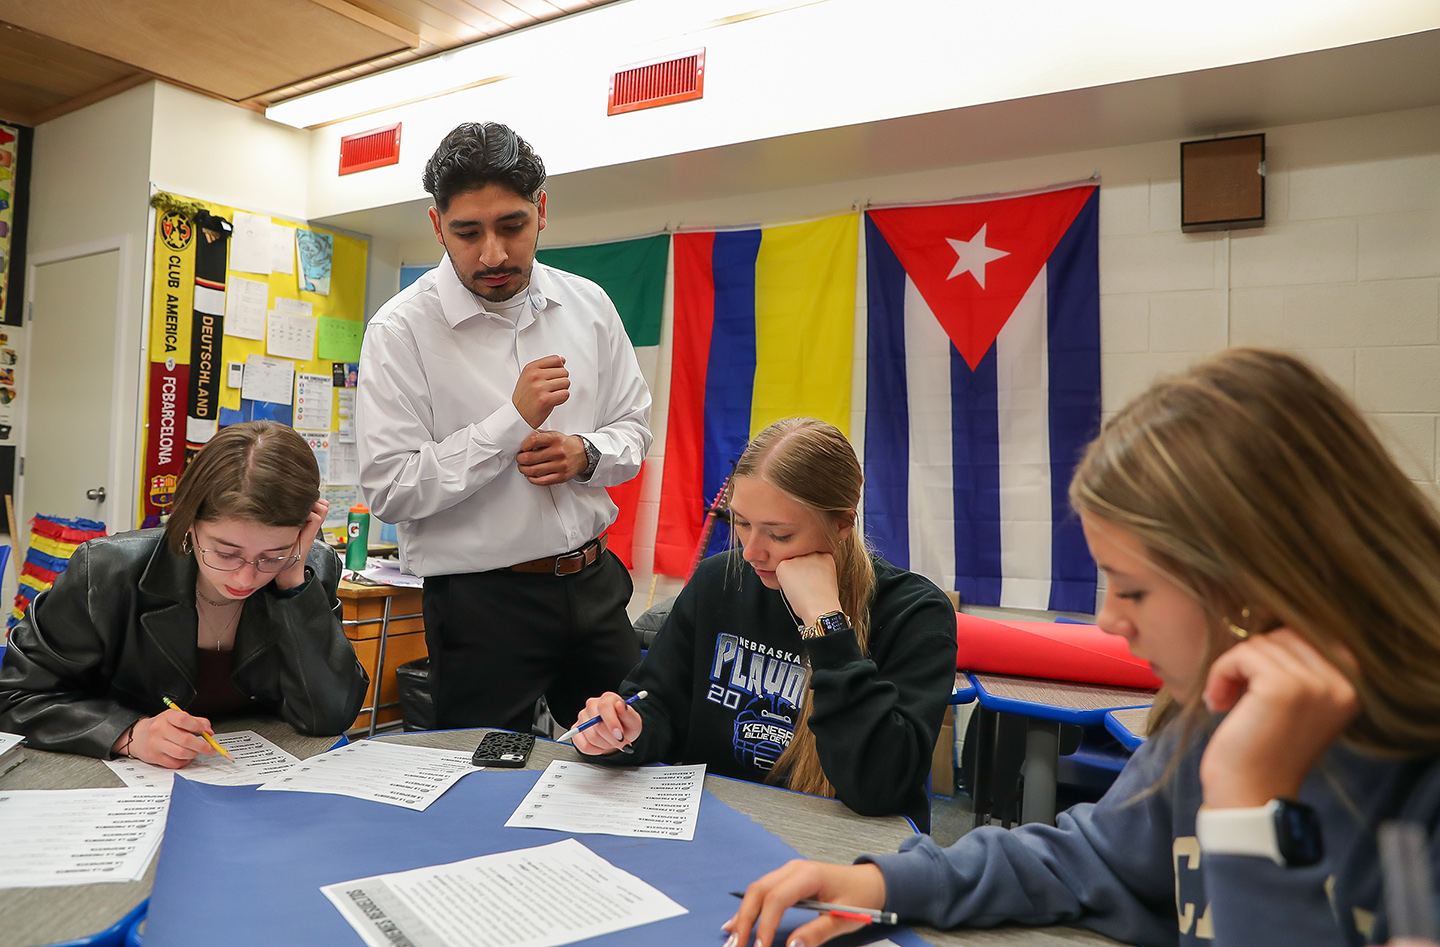 UNK graduate Luis Cordova teaches 7-12 Spanish at Kenesaw Public Schools. He’s part of the Early Career Educator Cohort program, which provides additional support, mentoring and professional development for teachers who recently started their careers. (Photos by Erika Pritchard, UNK Communications)